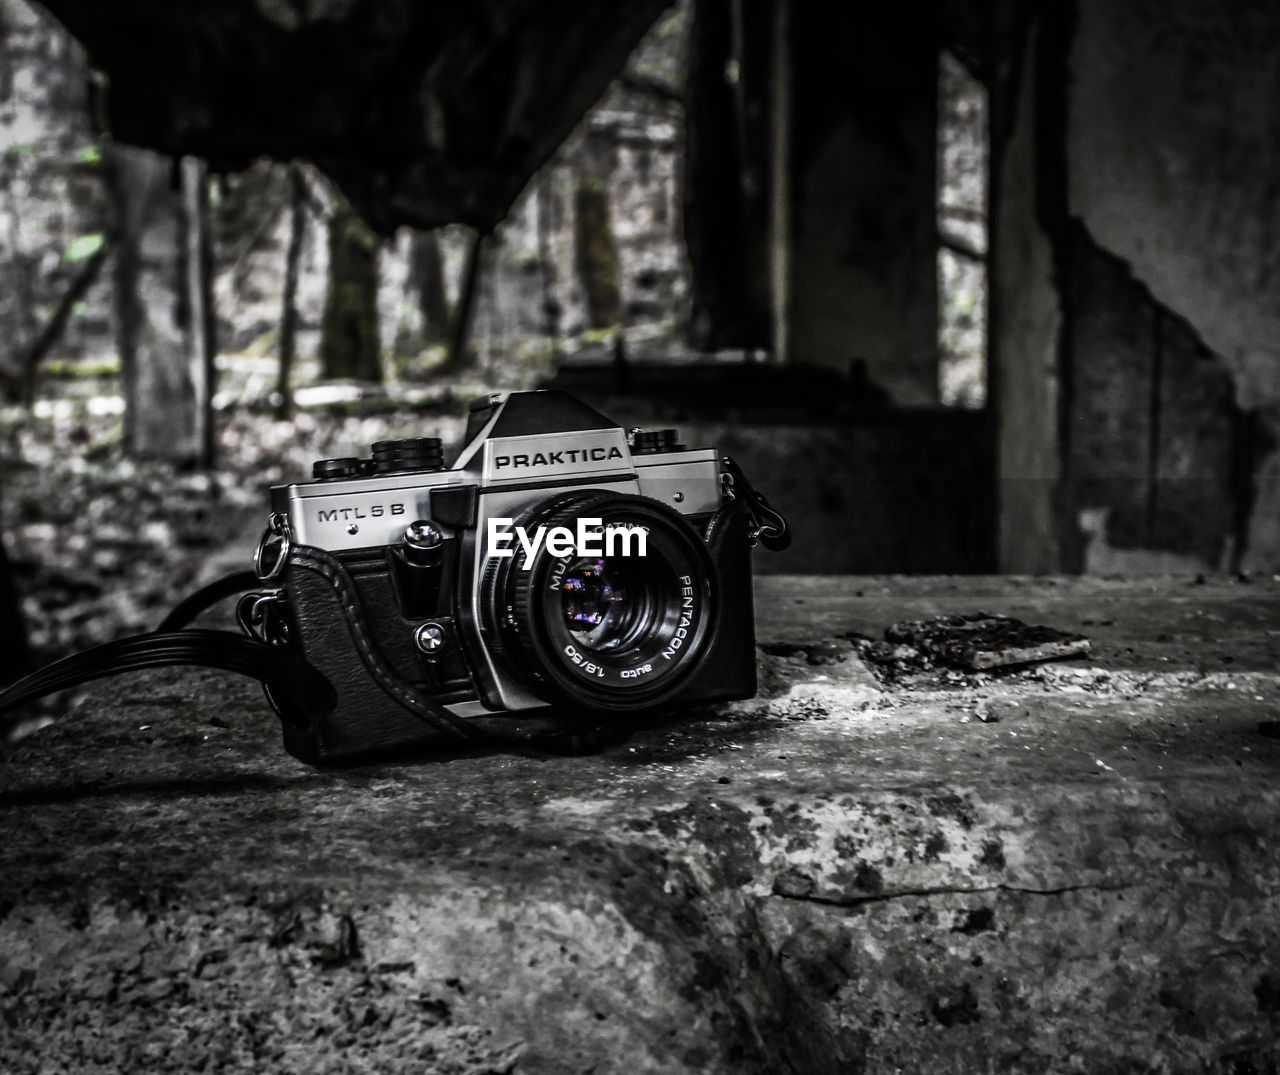 camera, black and white, darkness, black, monochrome, monochrome photography, digital slr, history, old, retro styled, light, the past, white, technology, no people, architecture, lens - optical instrument, day, focus on foreground, abandoned, photographic equipment, tree, rundown